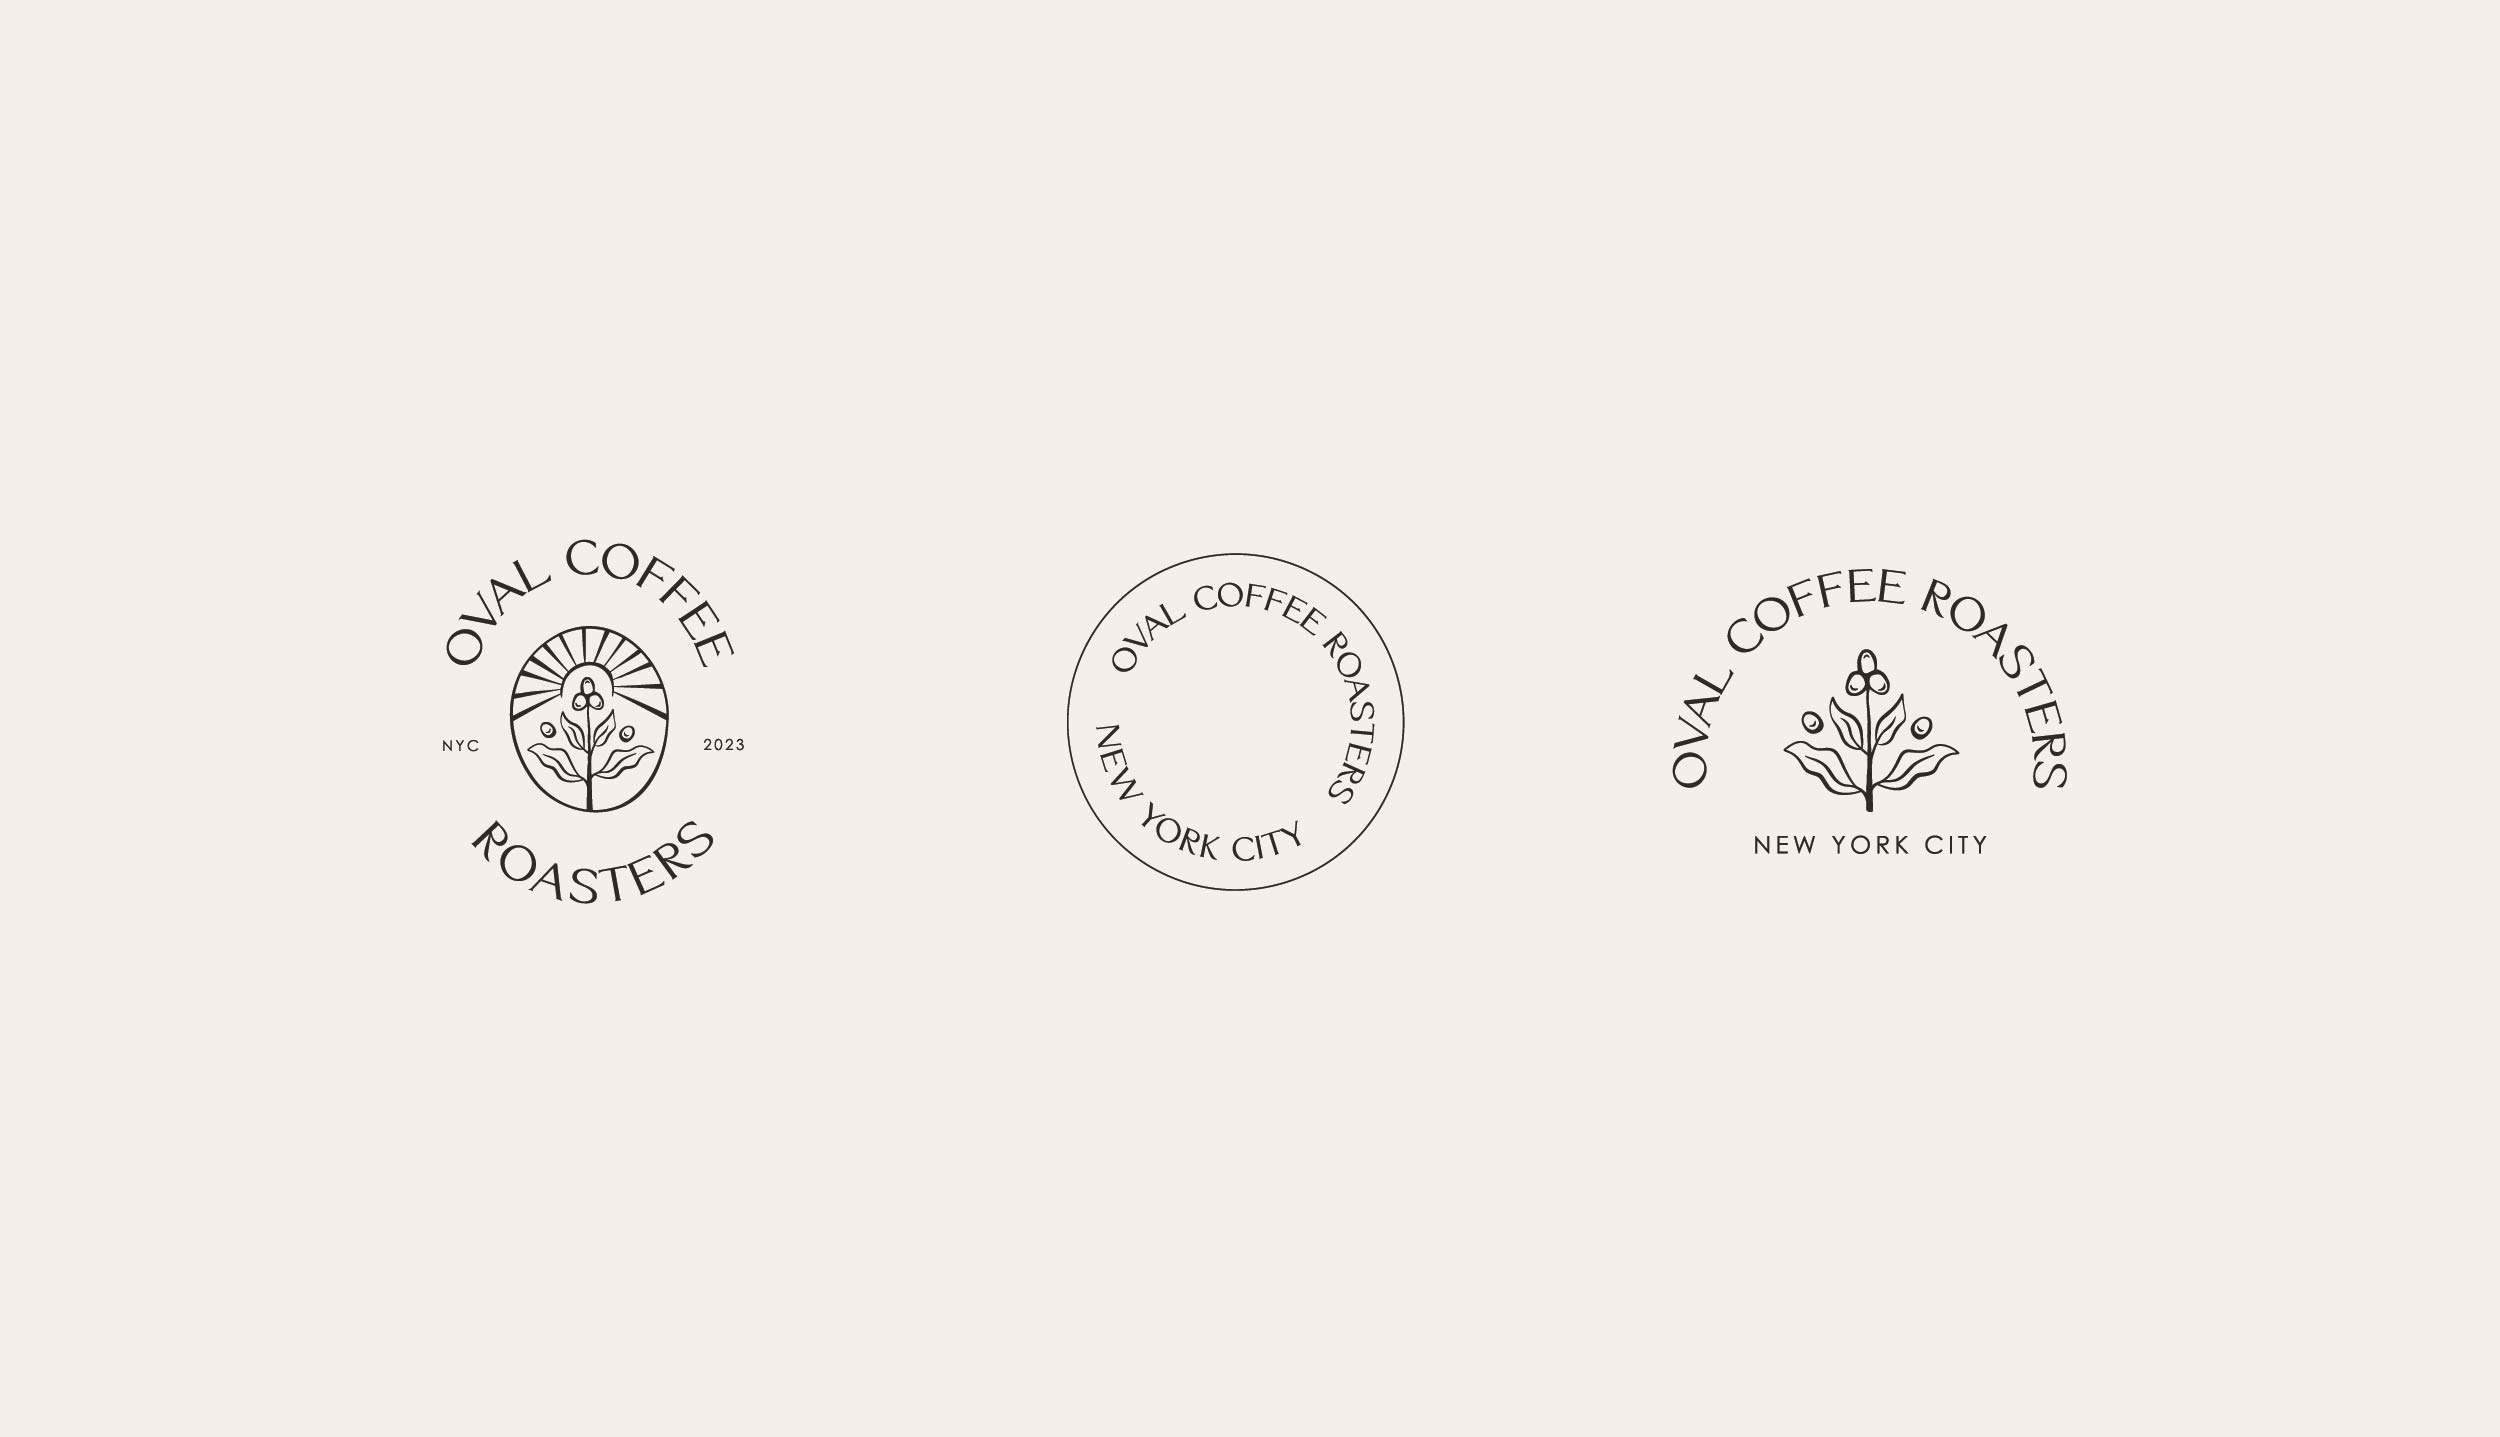 Creating Ethical and Sustainable Coffee Packaging for Oval